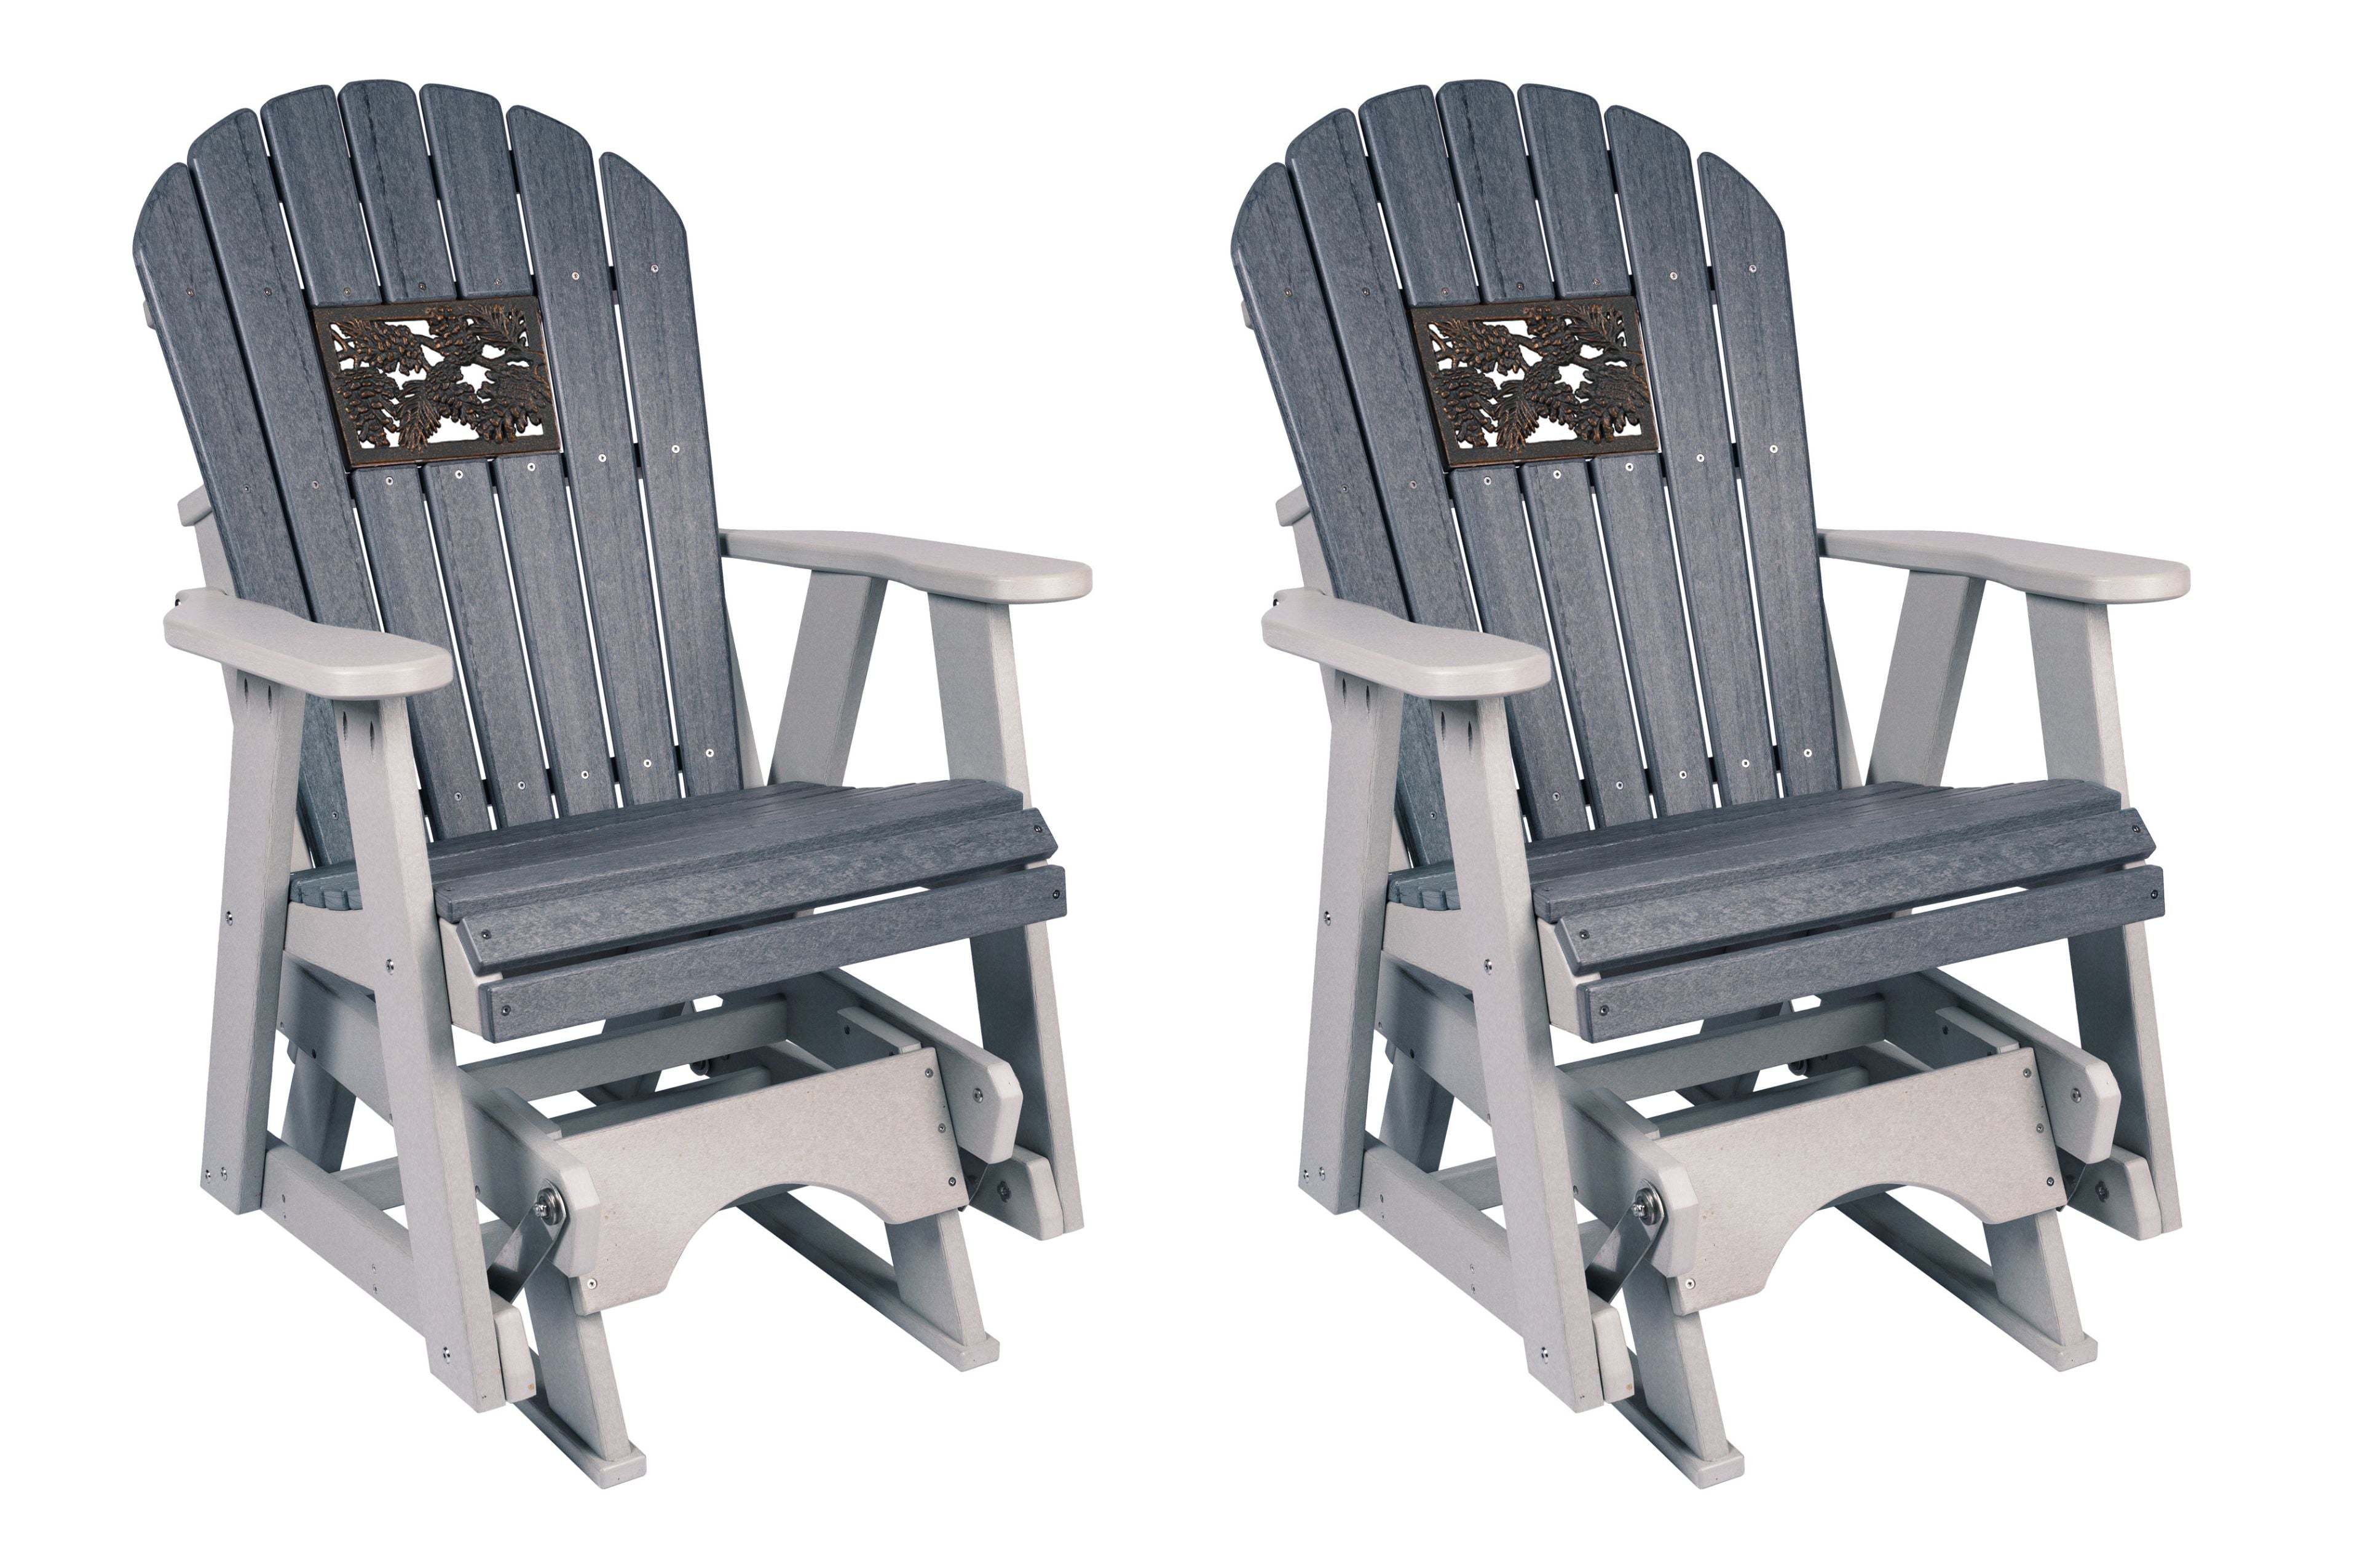 Glider Chairs with Pinecone Insert (set of 2)